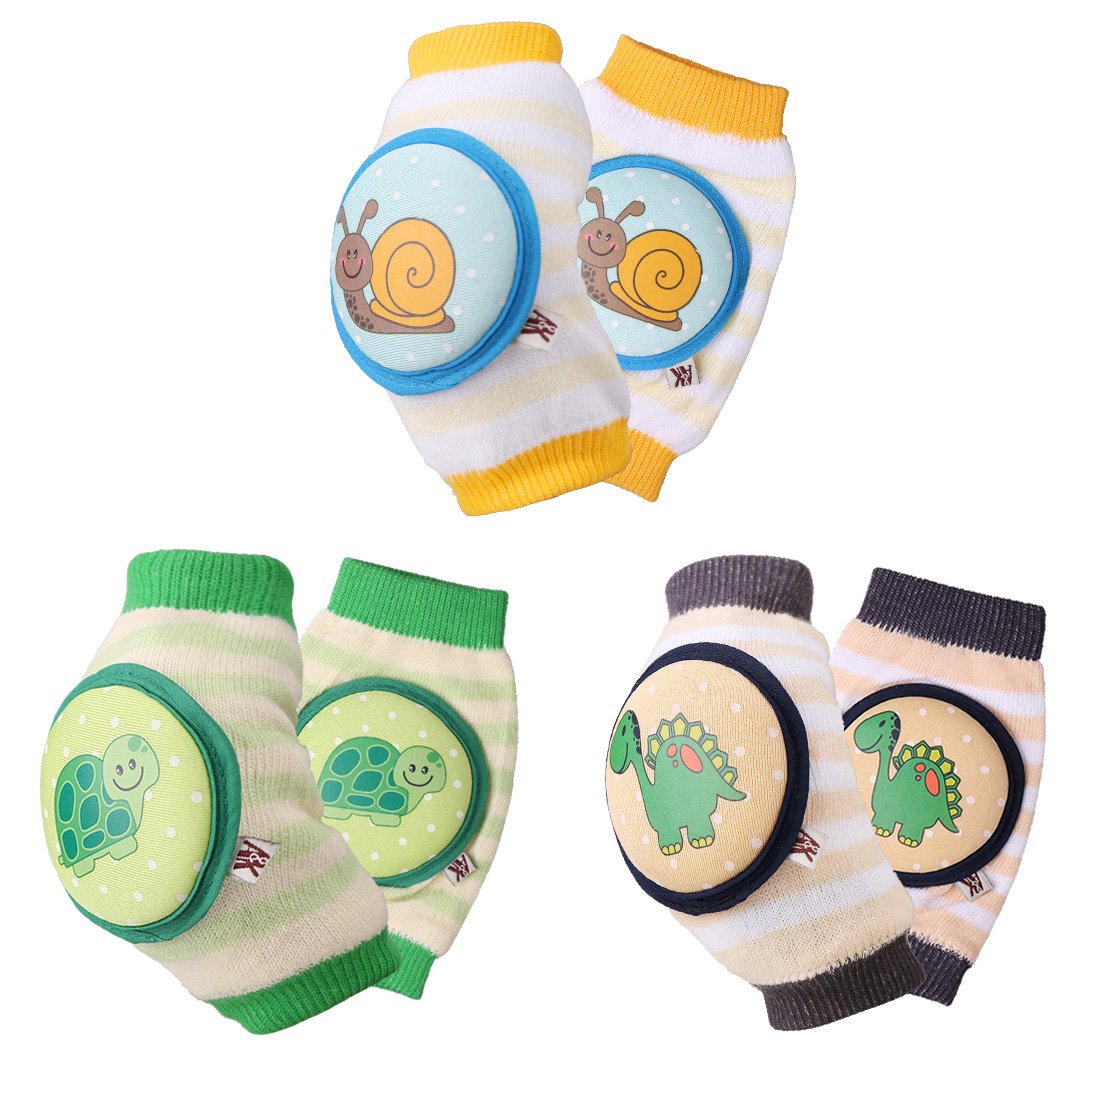 Top 9 Best Baby Knee Pads for Crawling Reviews in 2022 2